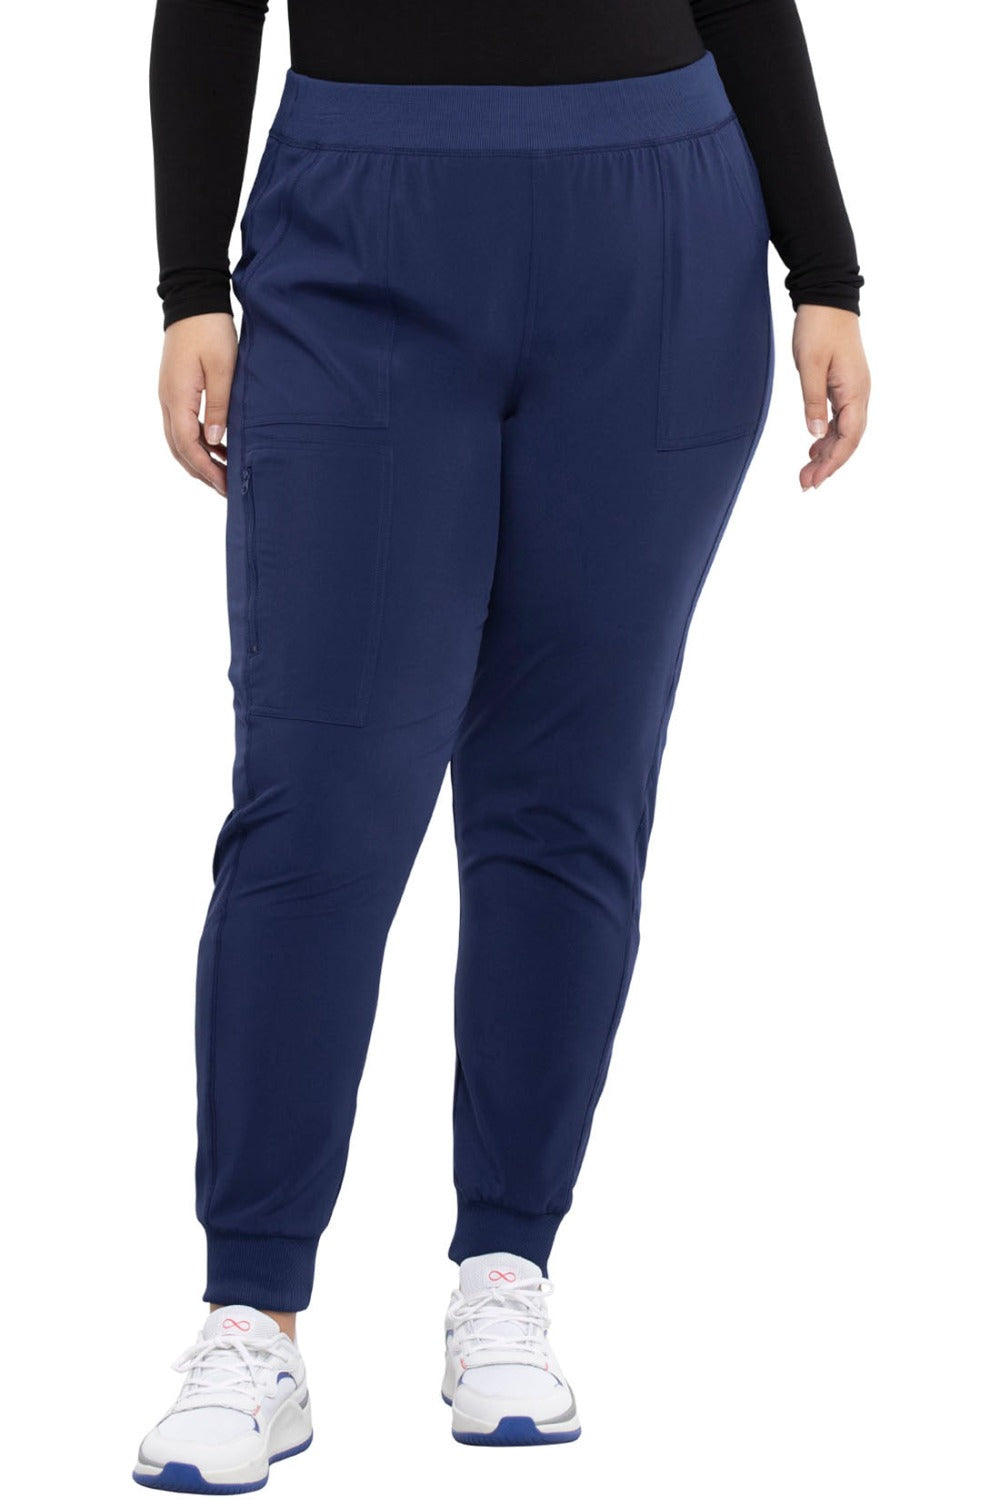 Cherokee Allura Petite Scrub Pant Pull On Jogger in Navy at Parker's Clothing and Shoes.